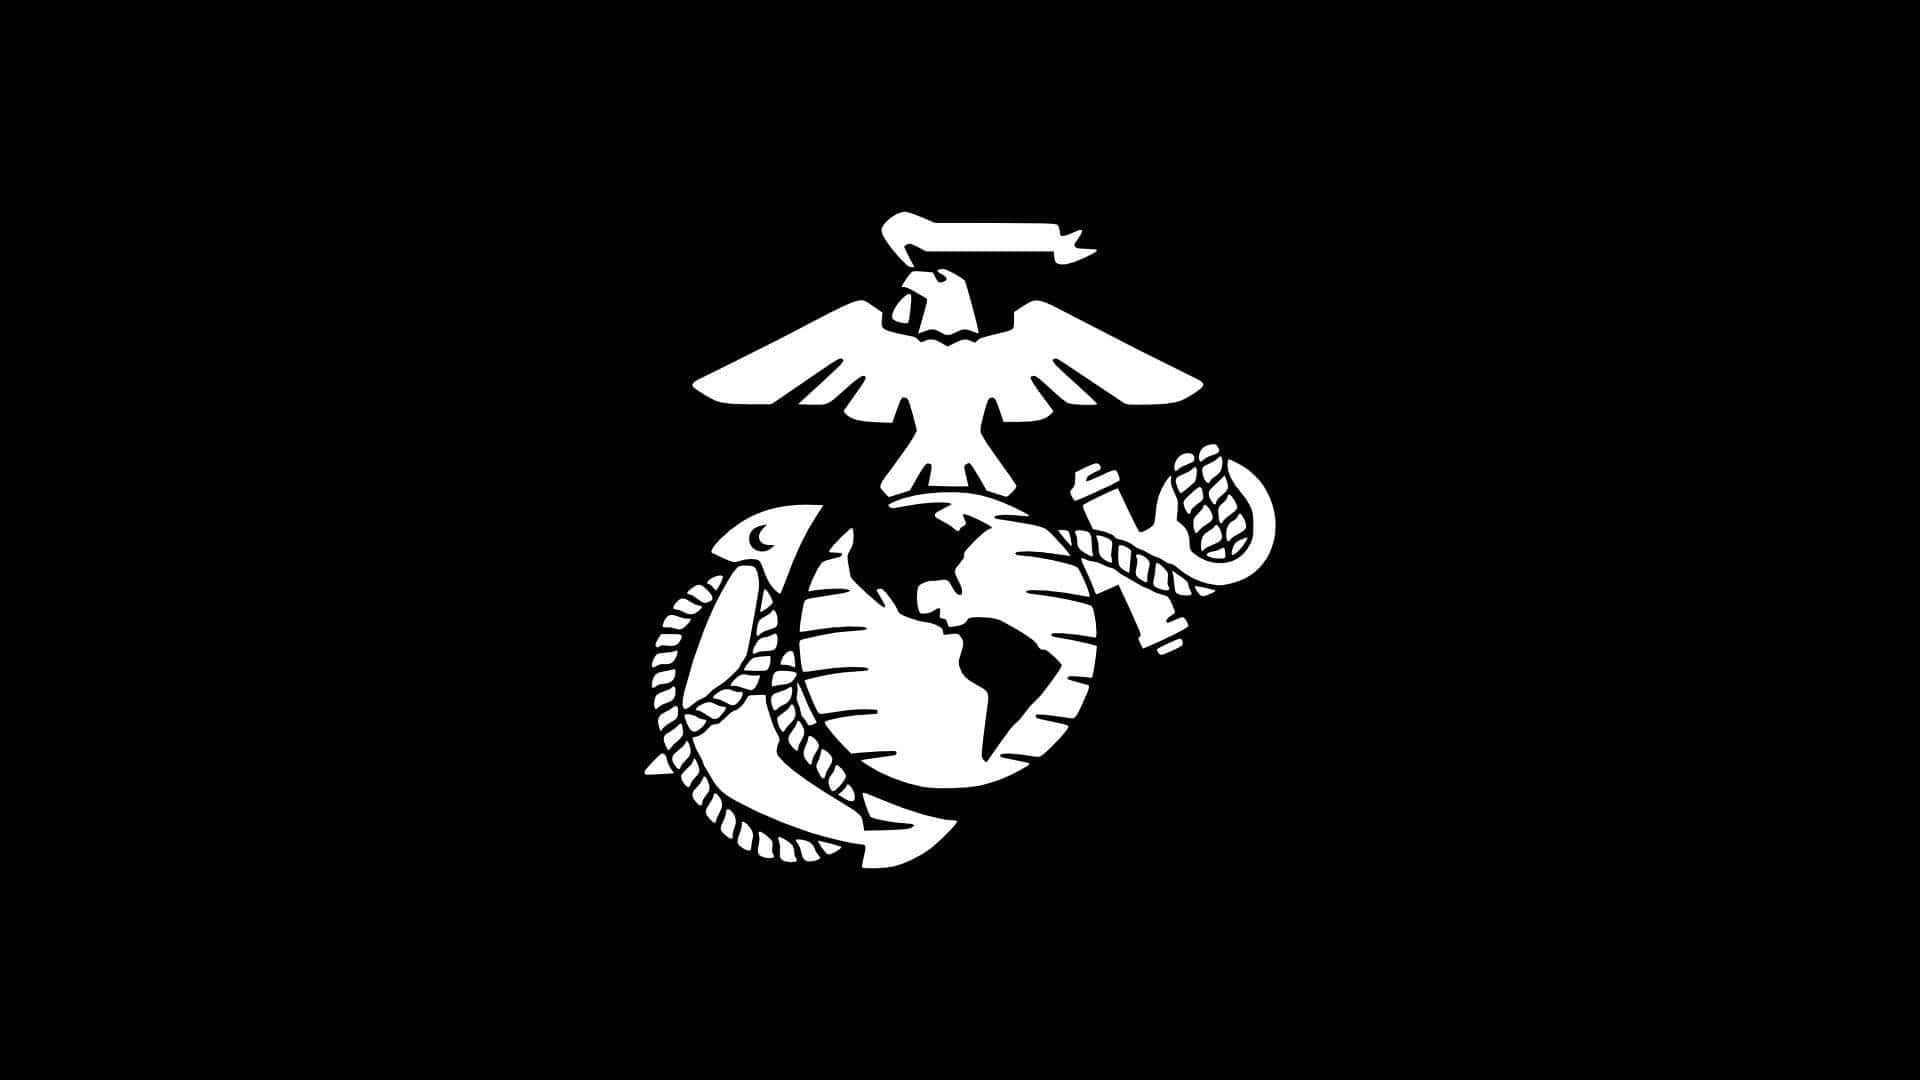 Official Logo of the United States Marine Corps Wallpaper